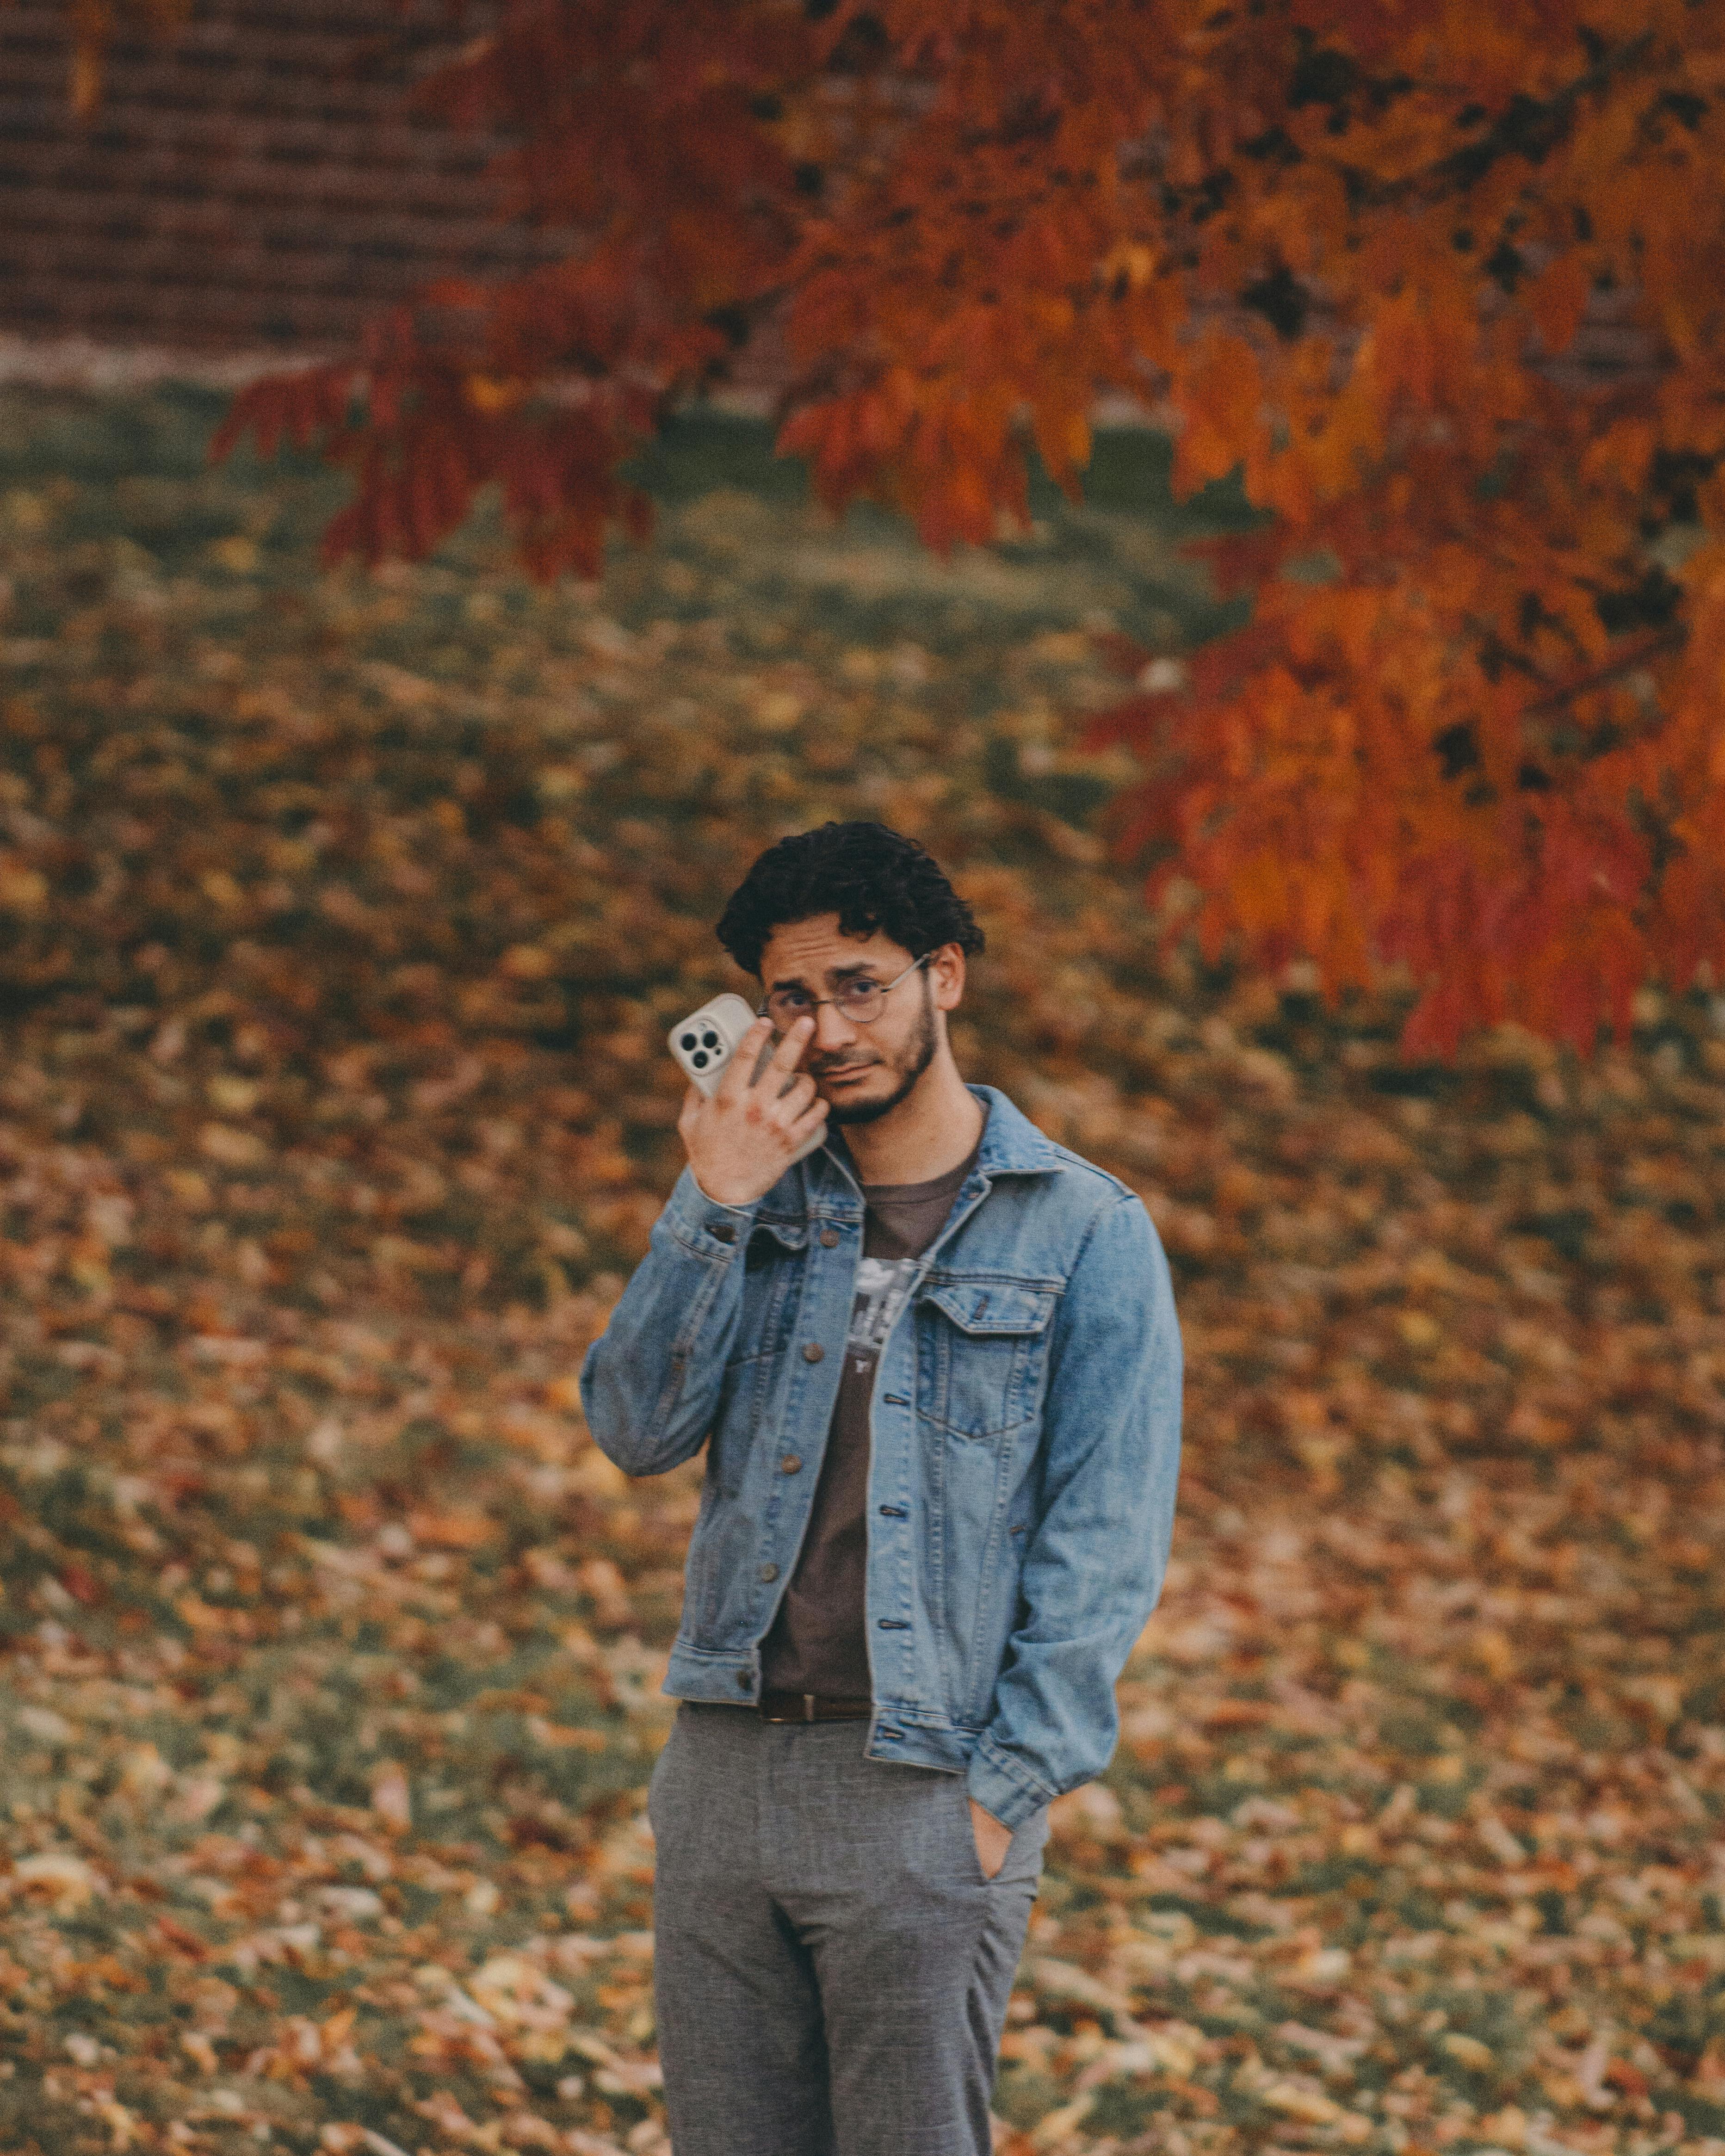 20 Fabulous Fall Photo Ideas for all the Fall Feels on Your Instagram